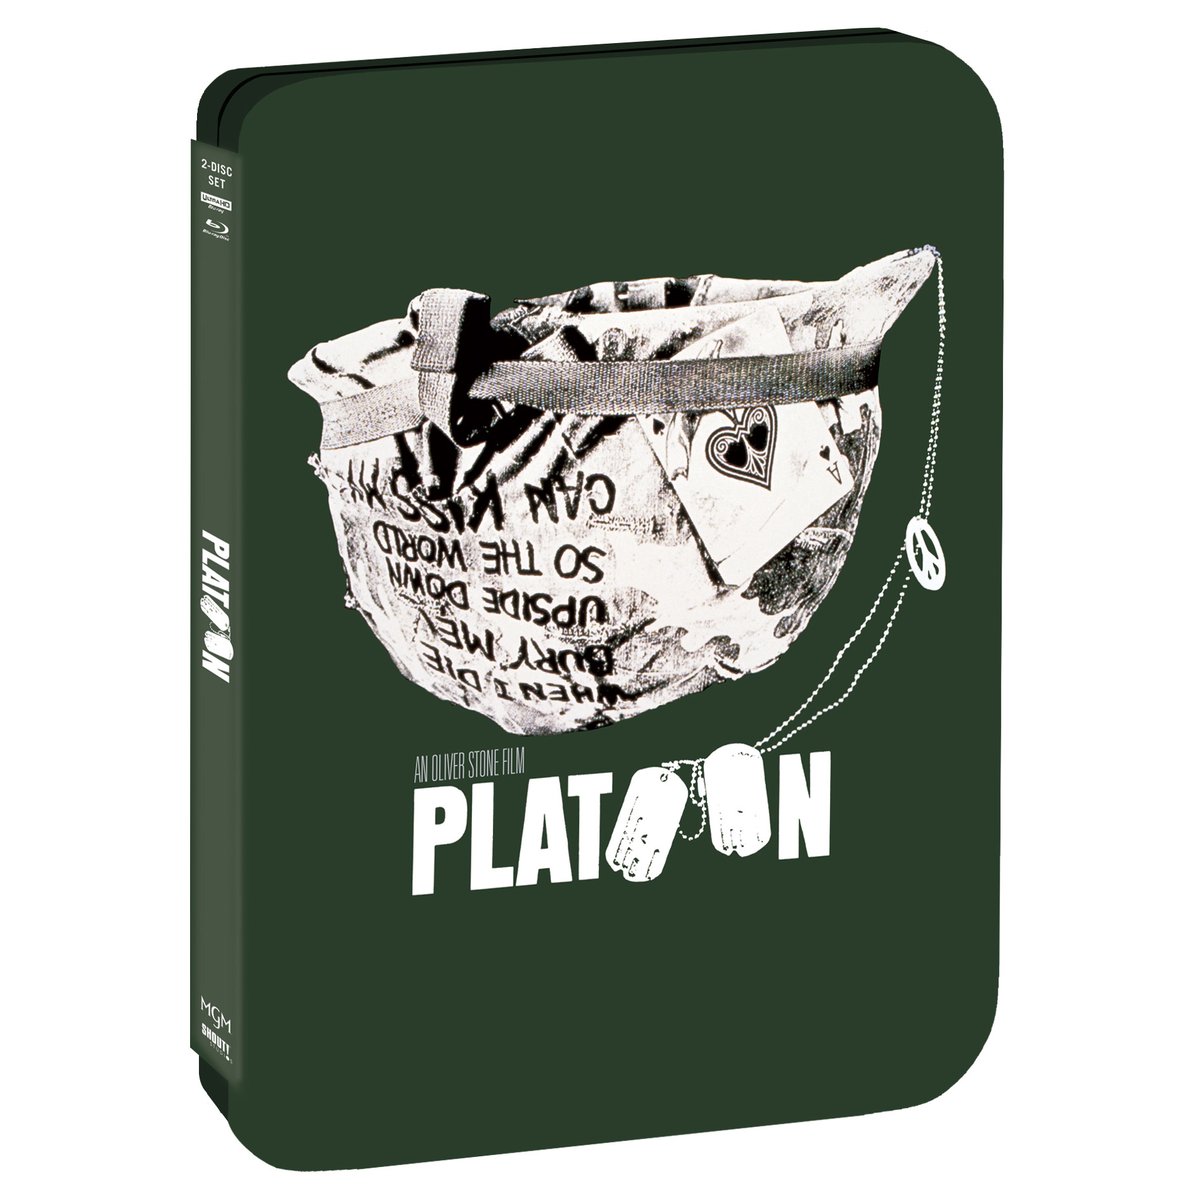 PLATOON tells the tale of PFC Chris Taylor (Charlie Sheen), a young Army recruit sent to Vietnam, who witnesses the atrocities of war – some of which are carried out by his fellow soldiers. Pre-order the 4K SteelBook: shoutfactory.com/products/plato…